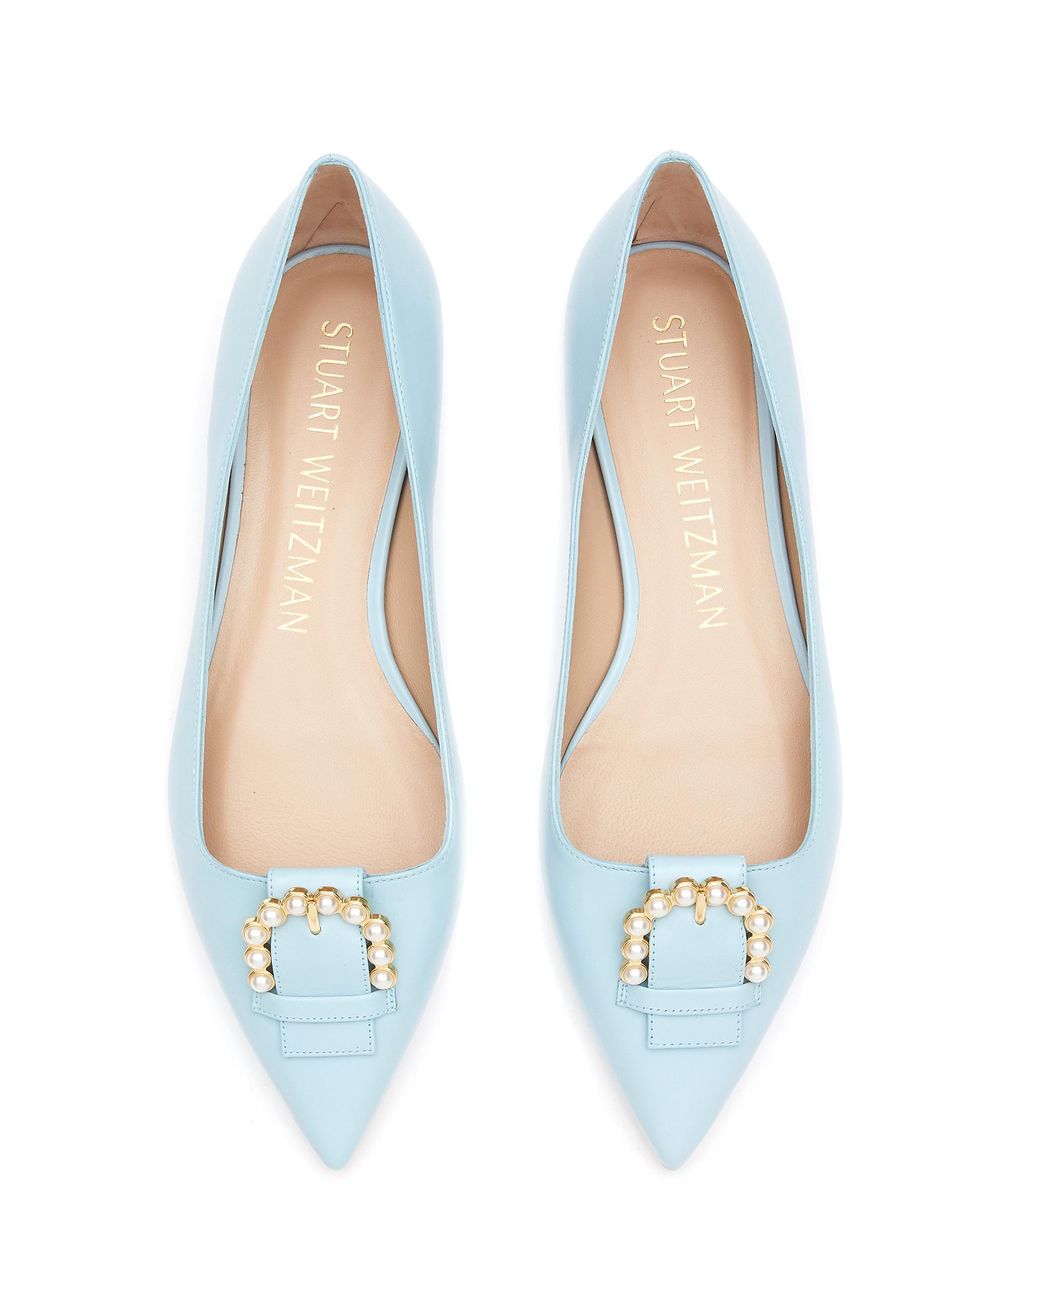 White Womens Shoes Flats and flat shoes Flat sandals Stuart Weitzman Leather Open-toe Heeled Sandals in Blue 